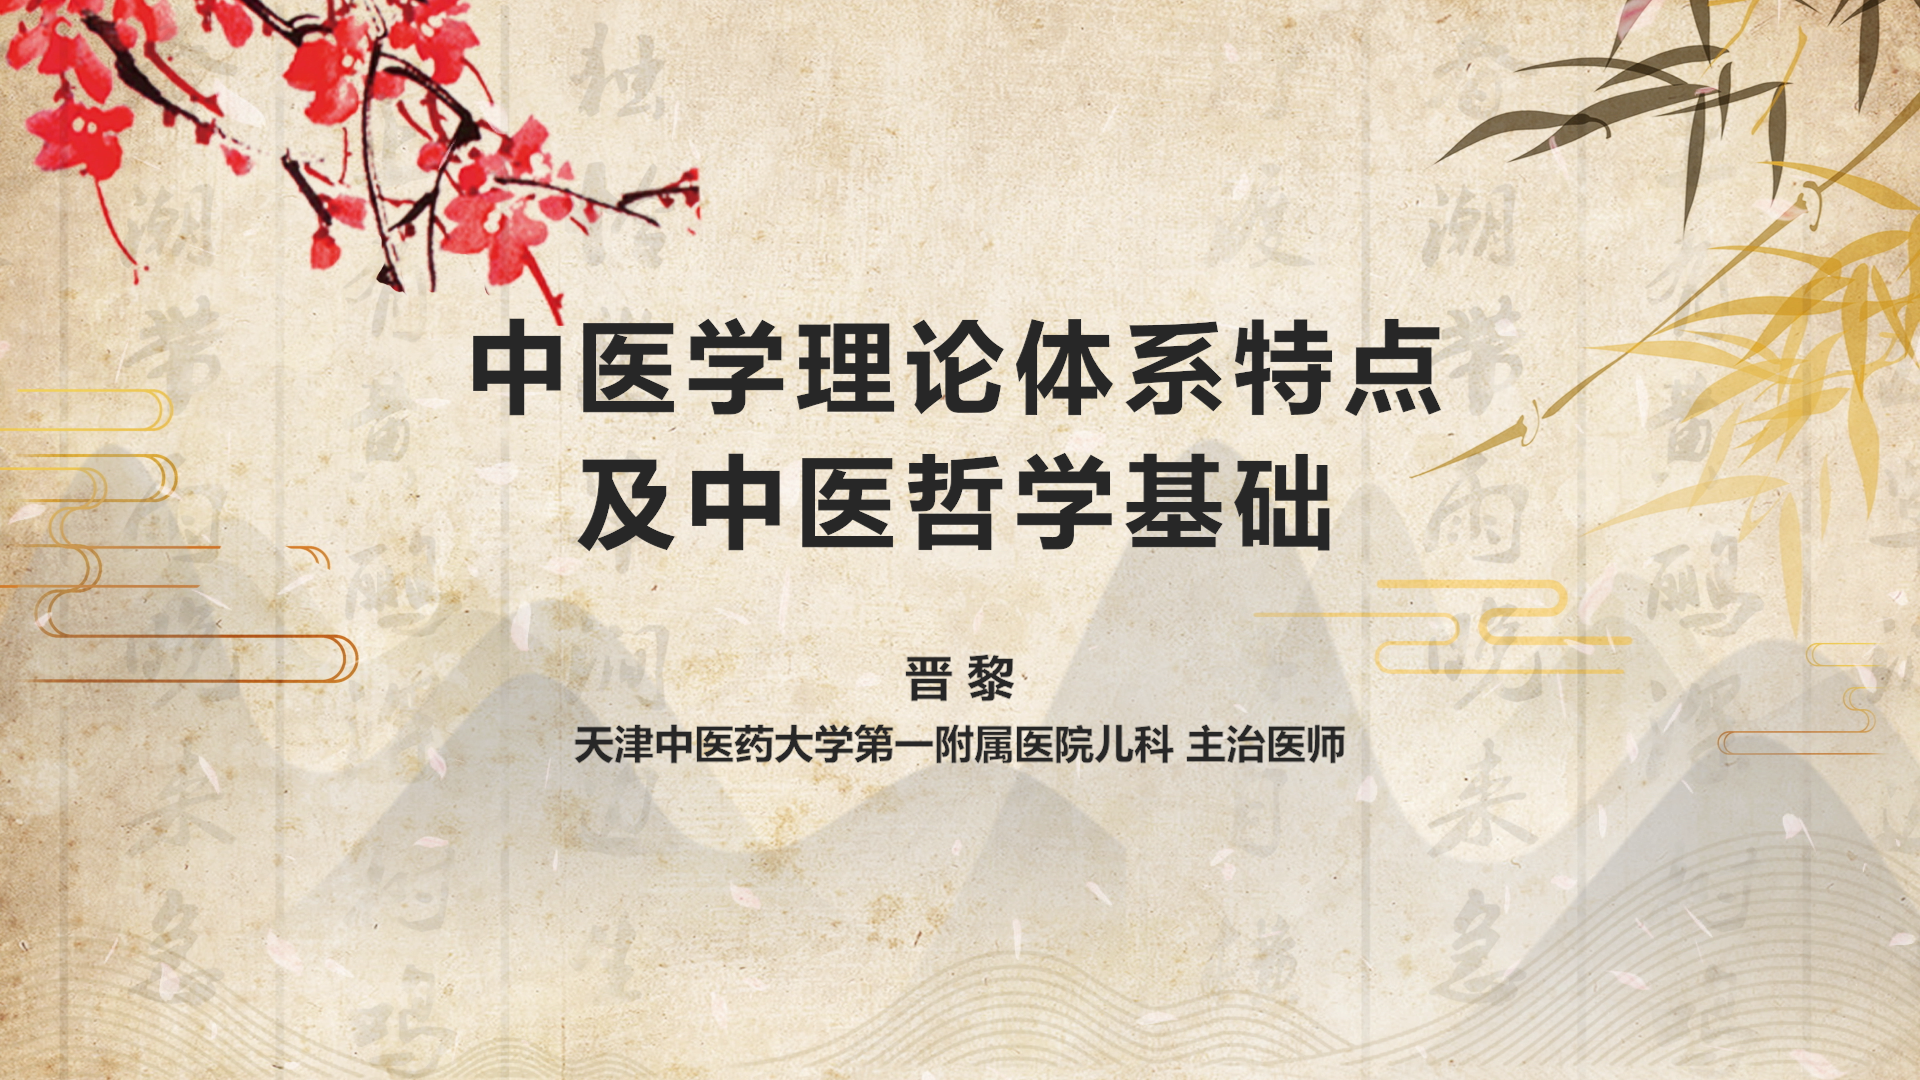 The theoretical system of Chinese medicine and the philosophical basis of Chinese medicine